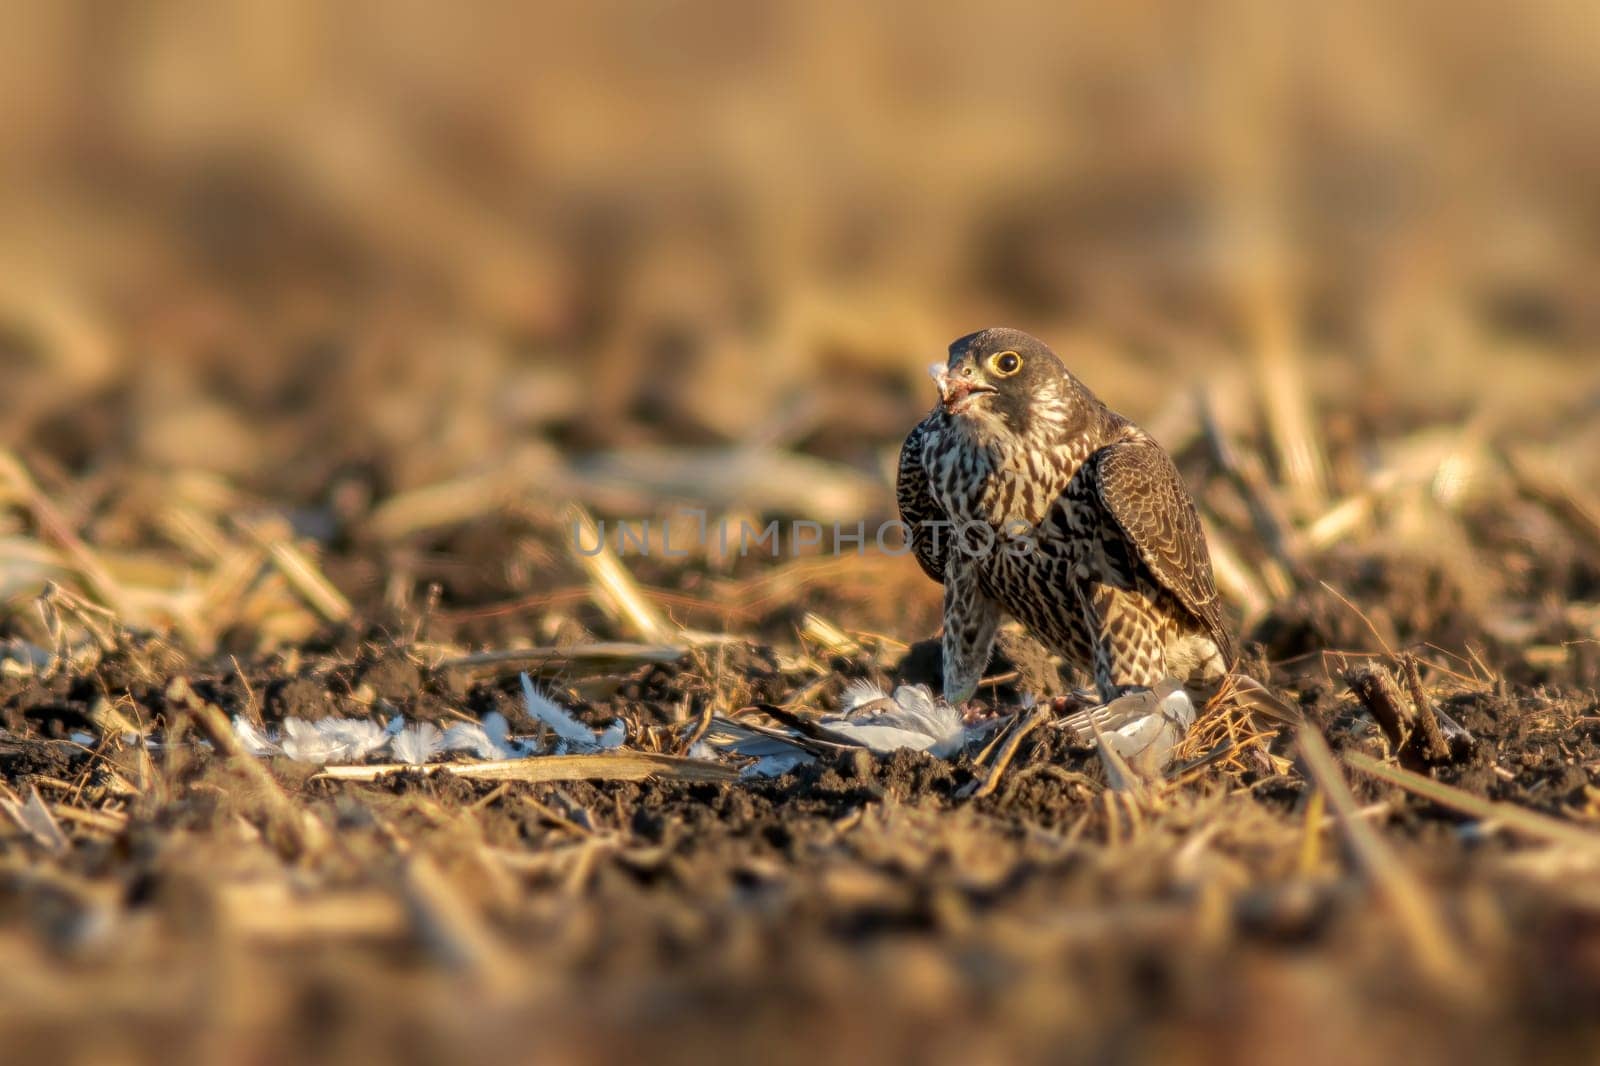 a peregrine falcon sits on a harvested wheat field and eats its prey